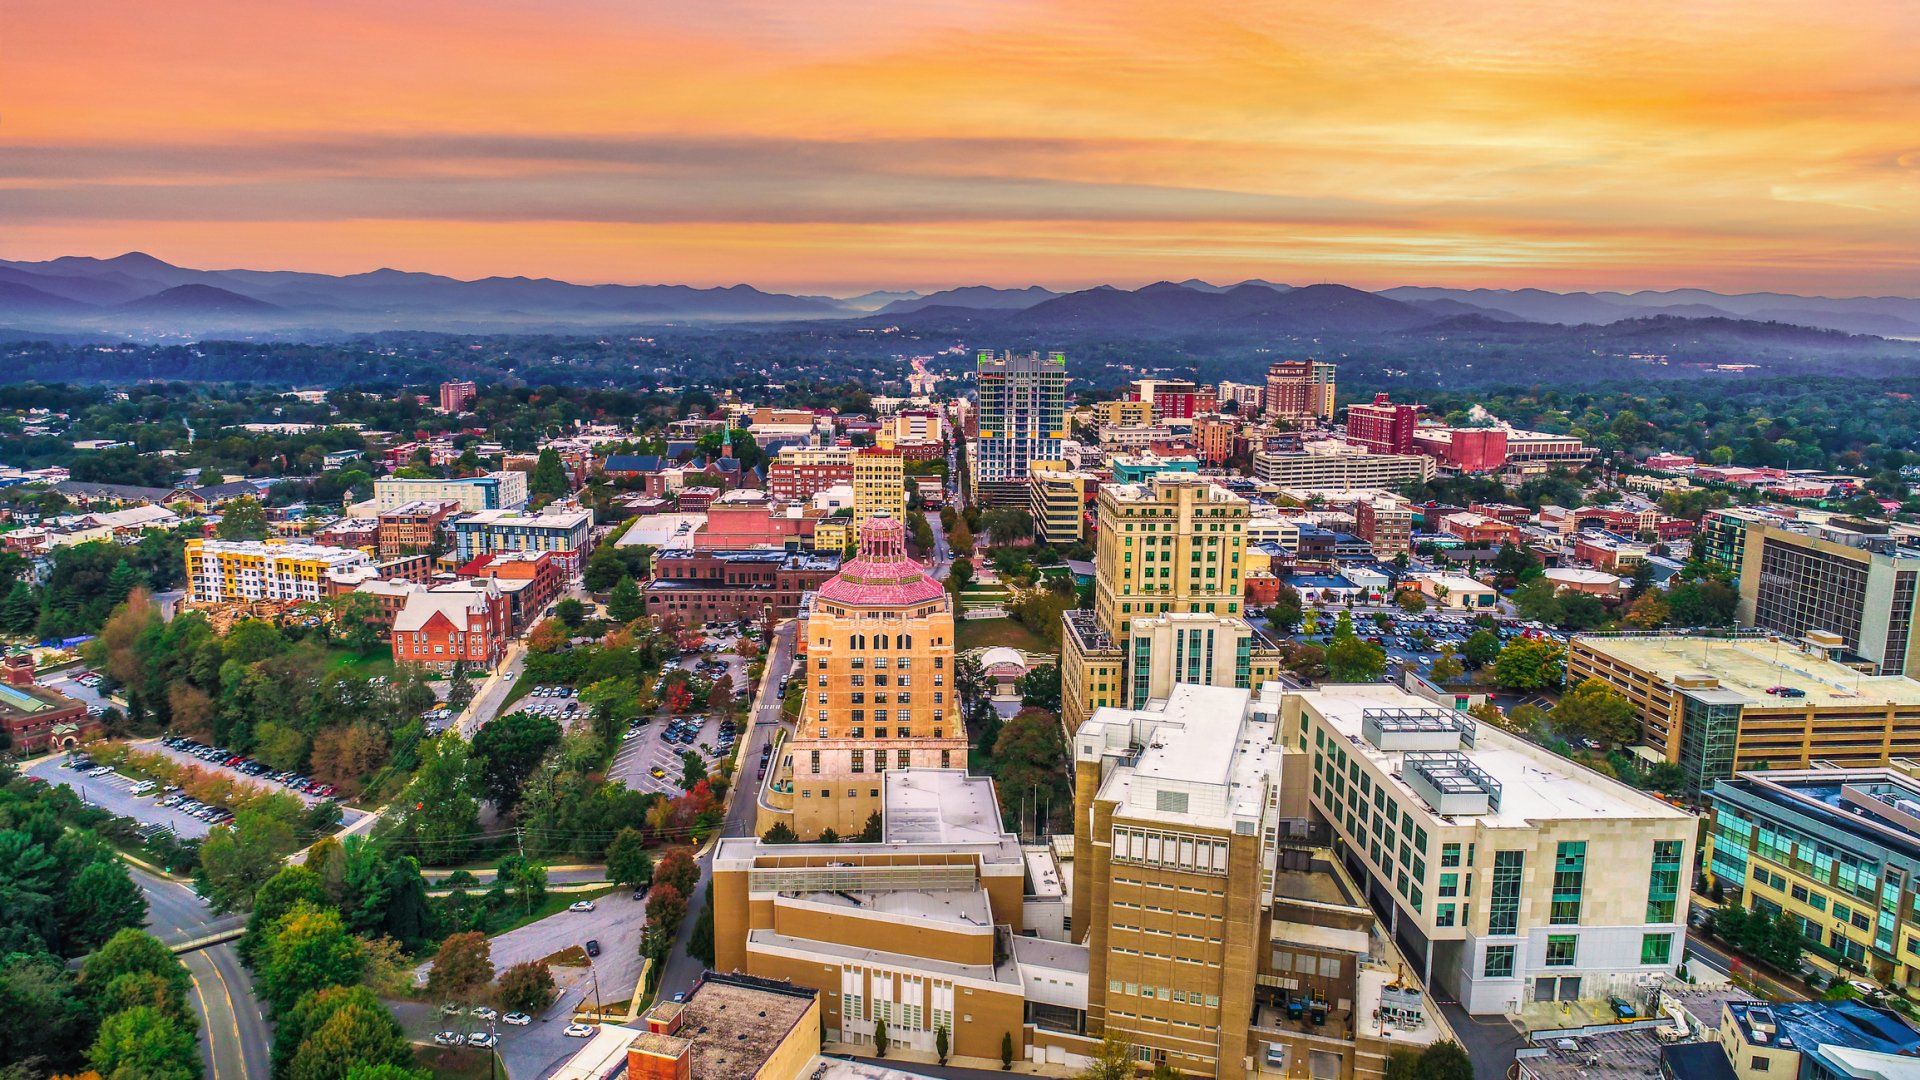 an aerial view of a city at sunset with mountains in the background .